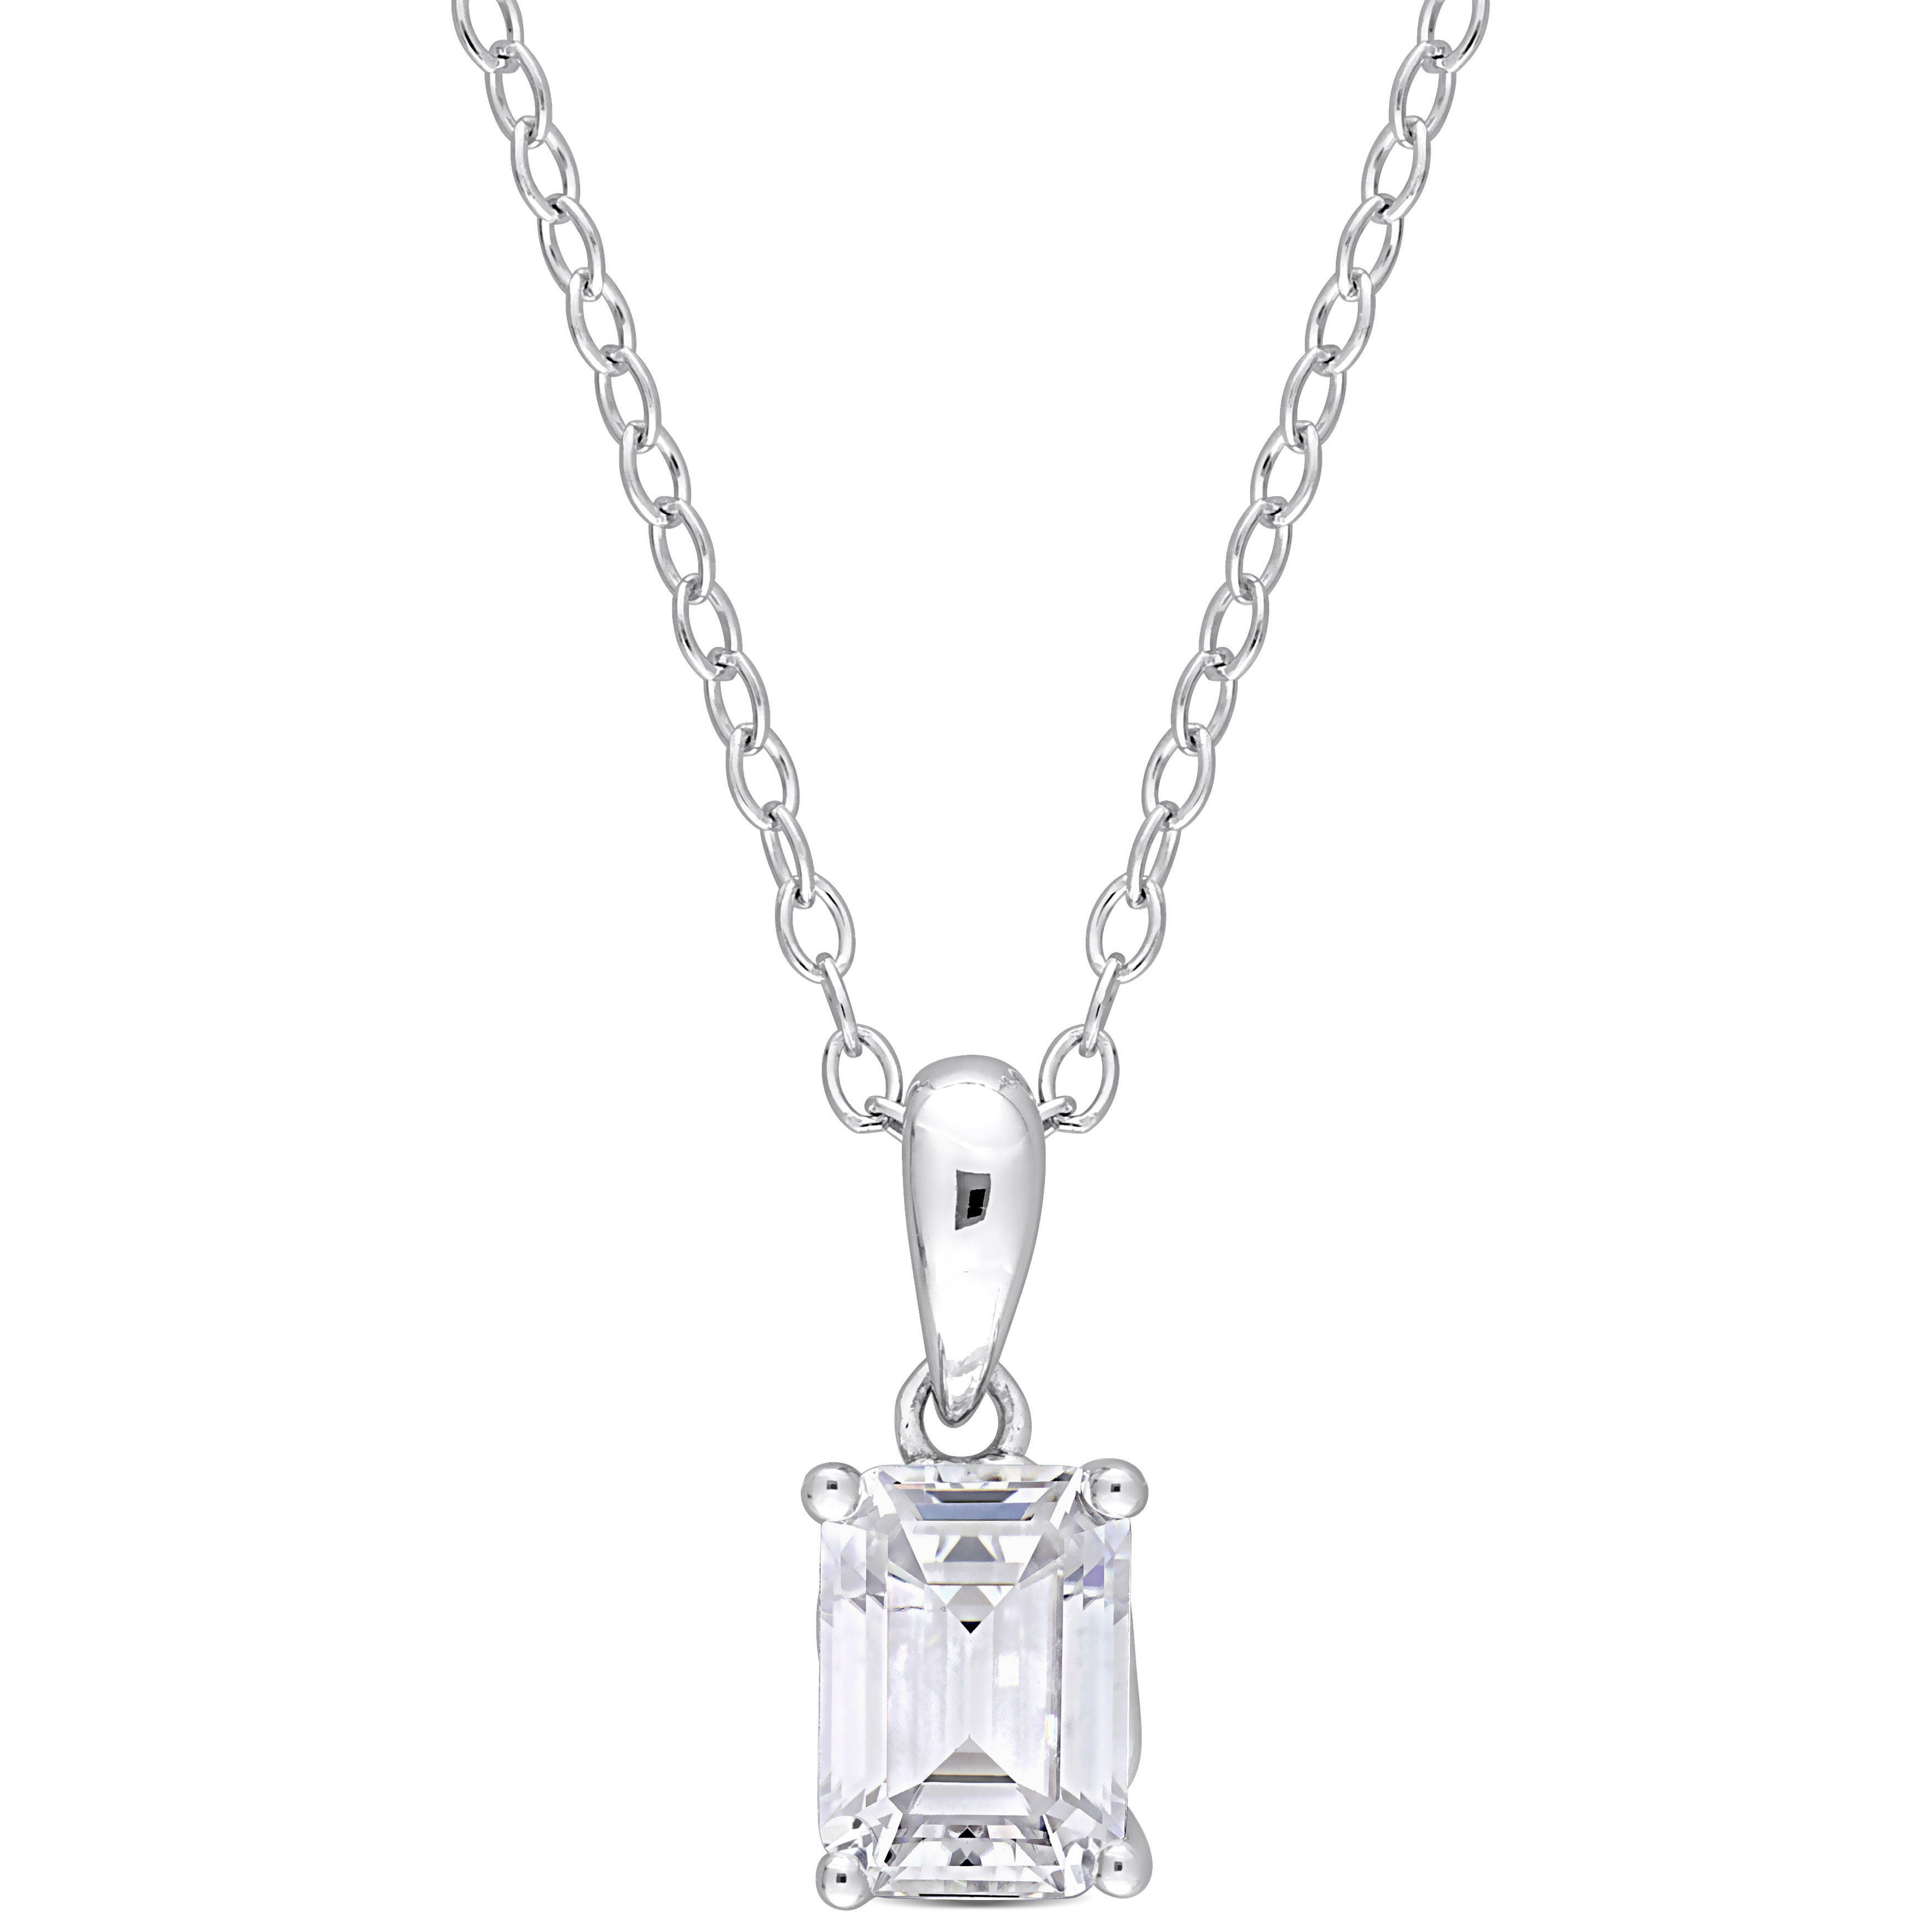 1 5/8 CT TGW Emerald Cut Created White Sapphire Solitaire Heart Design Pendant with Chain in Sterling Silver - 18 in.